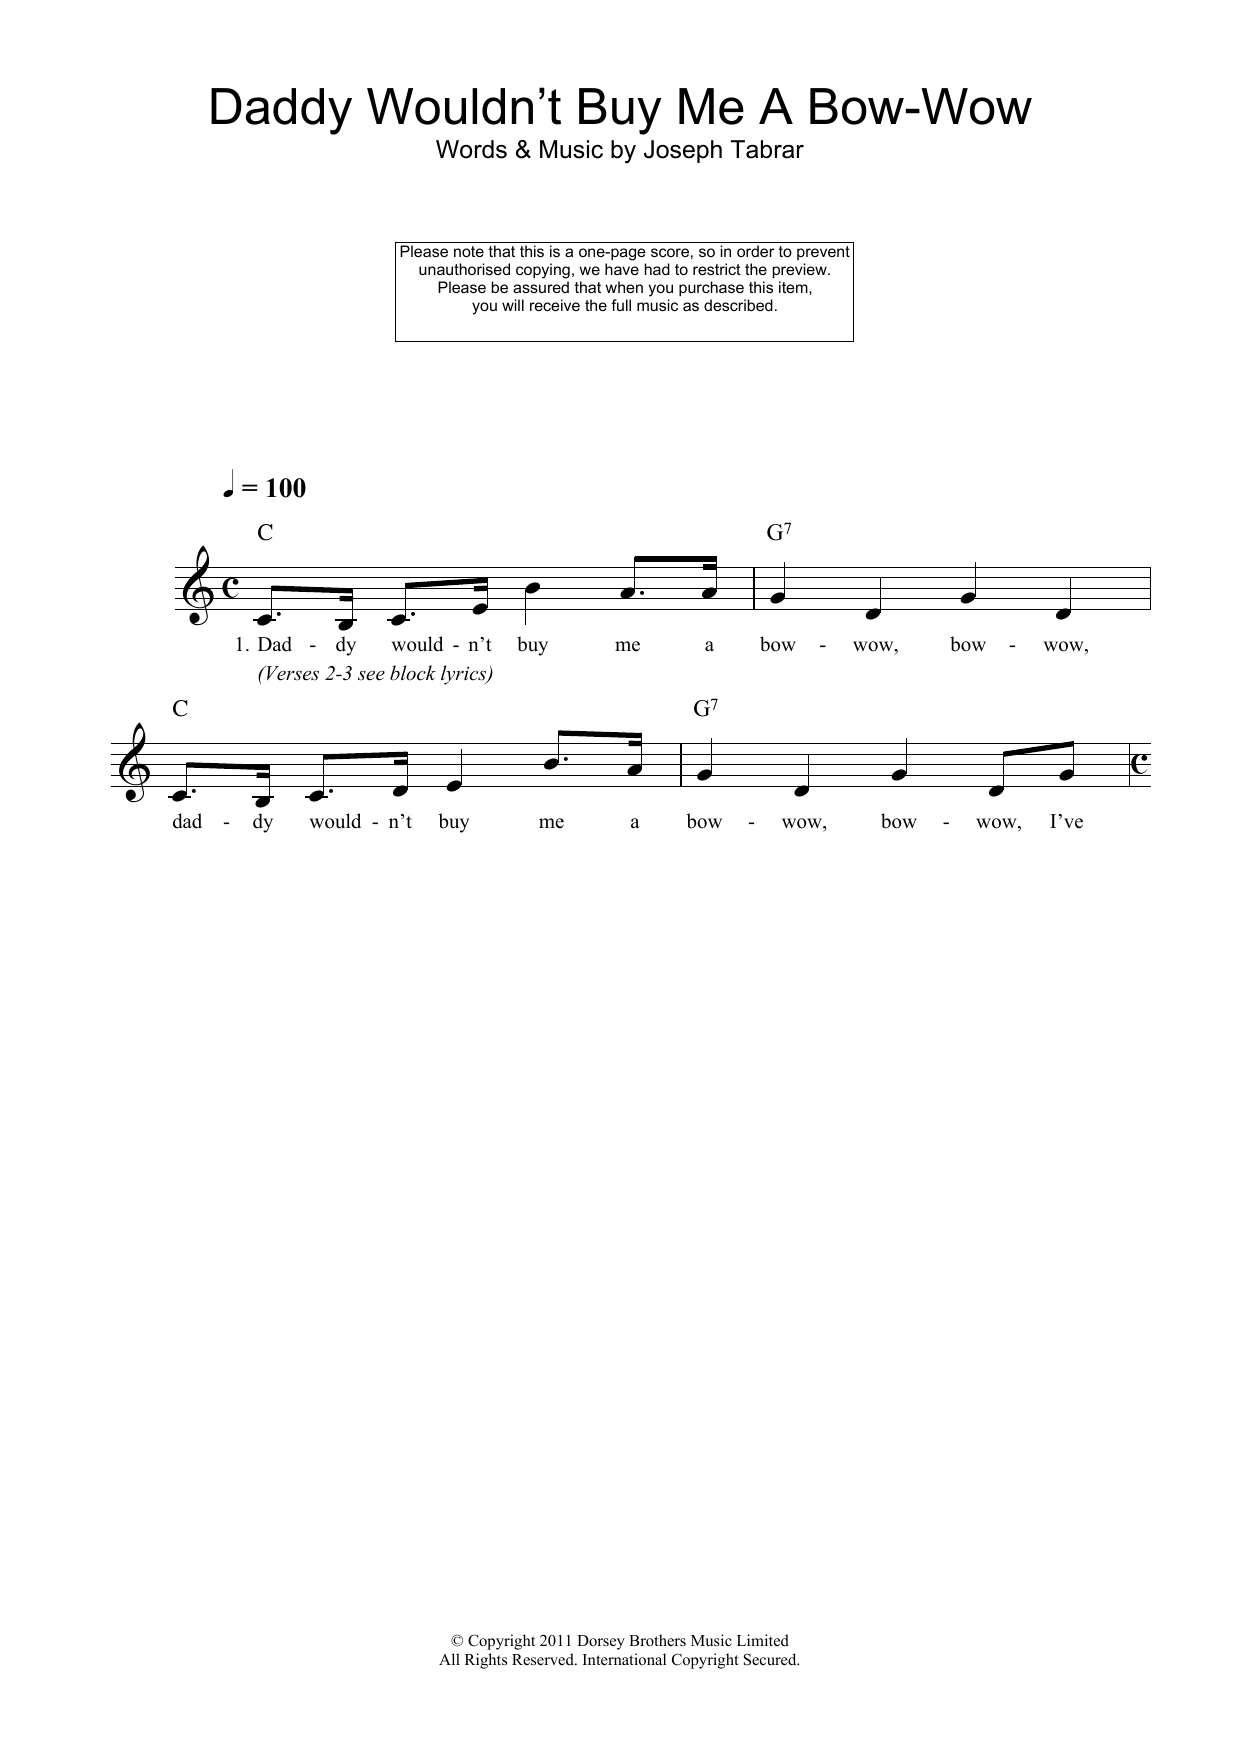 Download Joseph Tabrar Daddy Wouldn't Buy Me A Bow-Wow Sheet Music